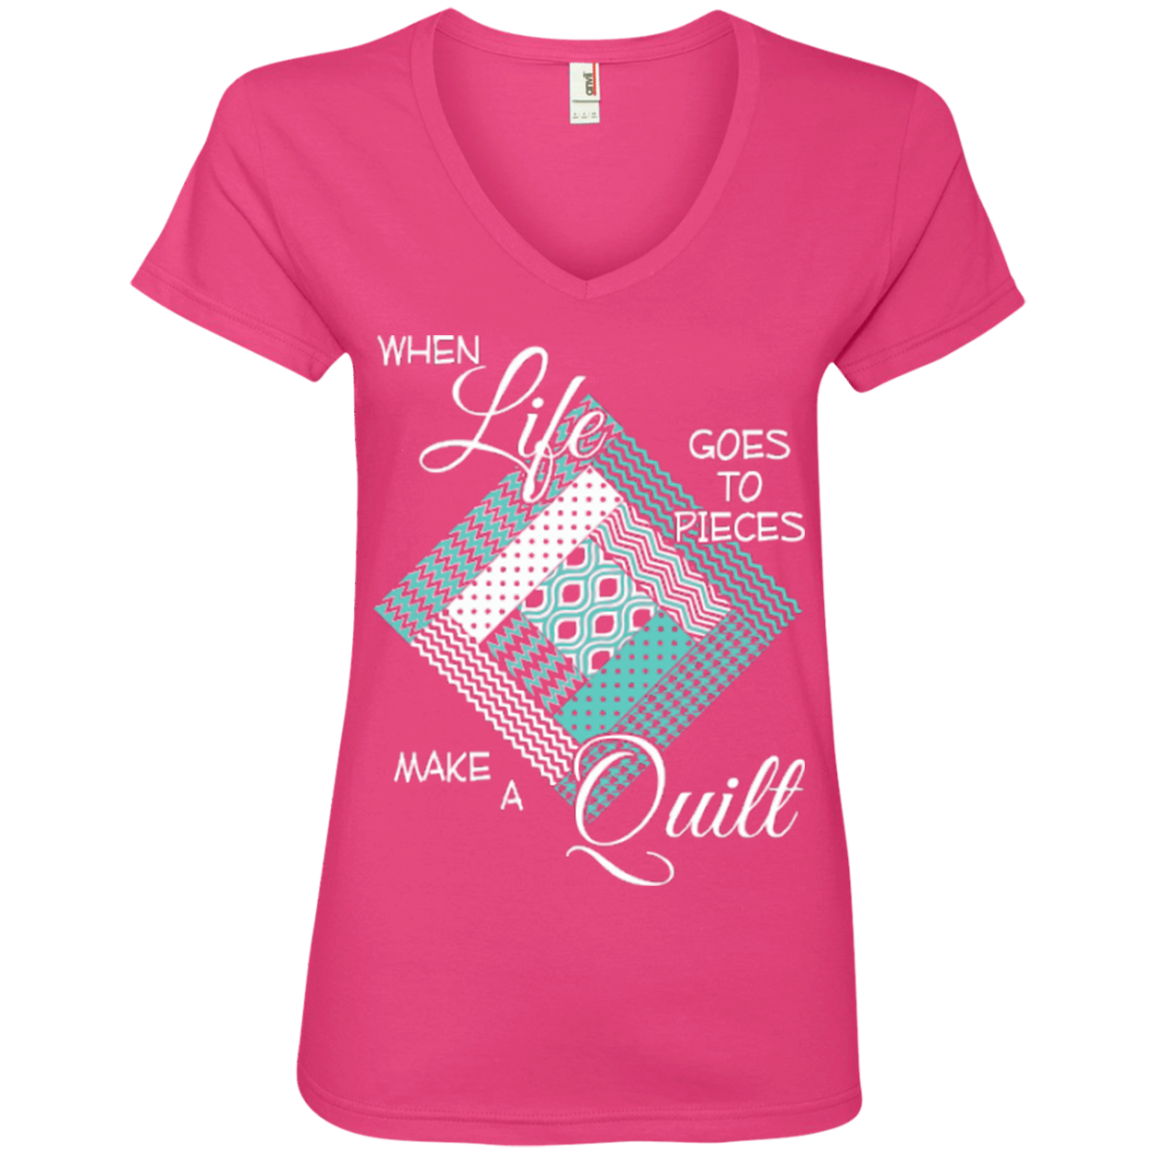 Make a Quilt (turquoise) Ladies V-Neck Tee - Crafter4Life - 2